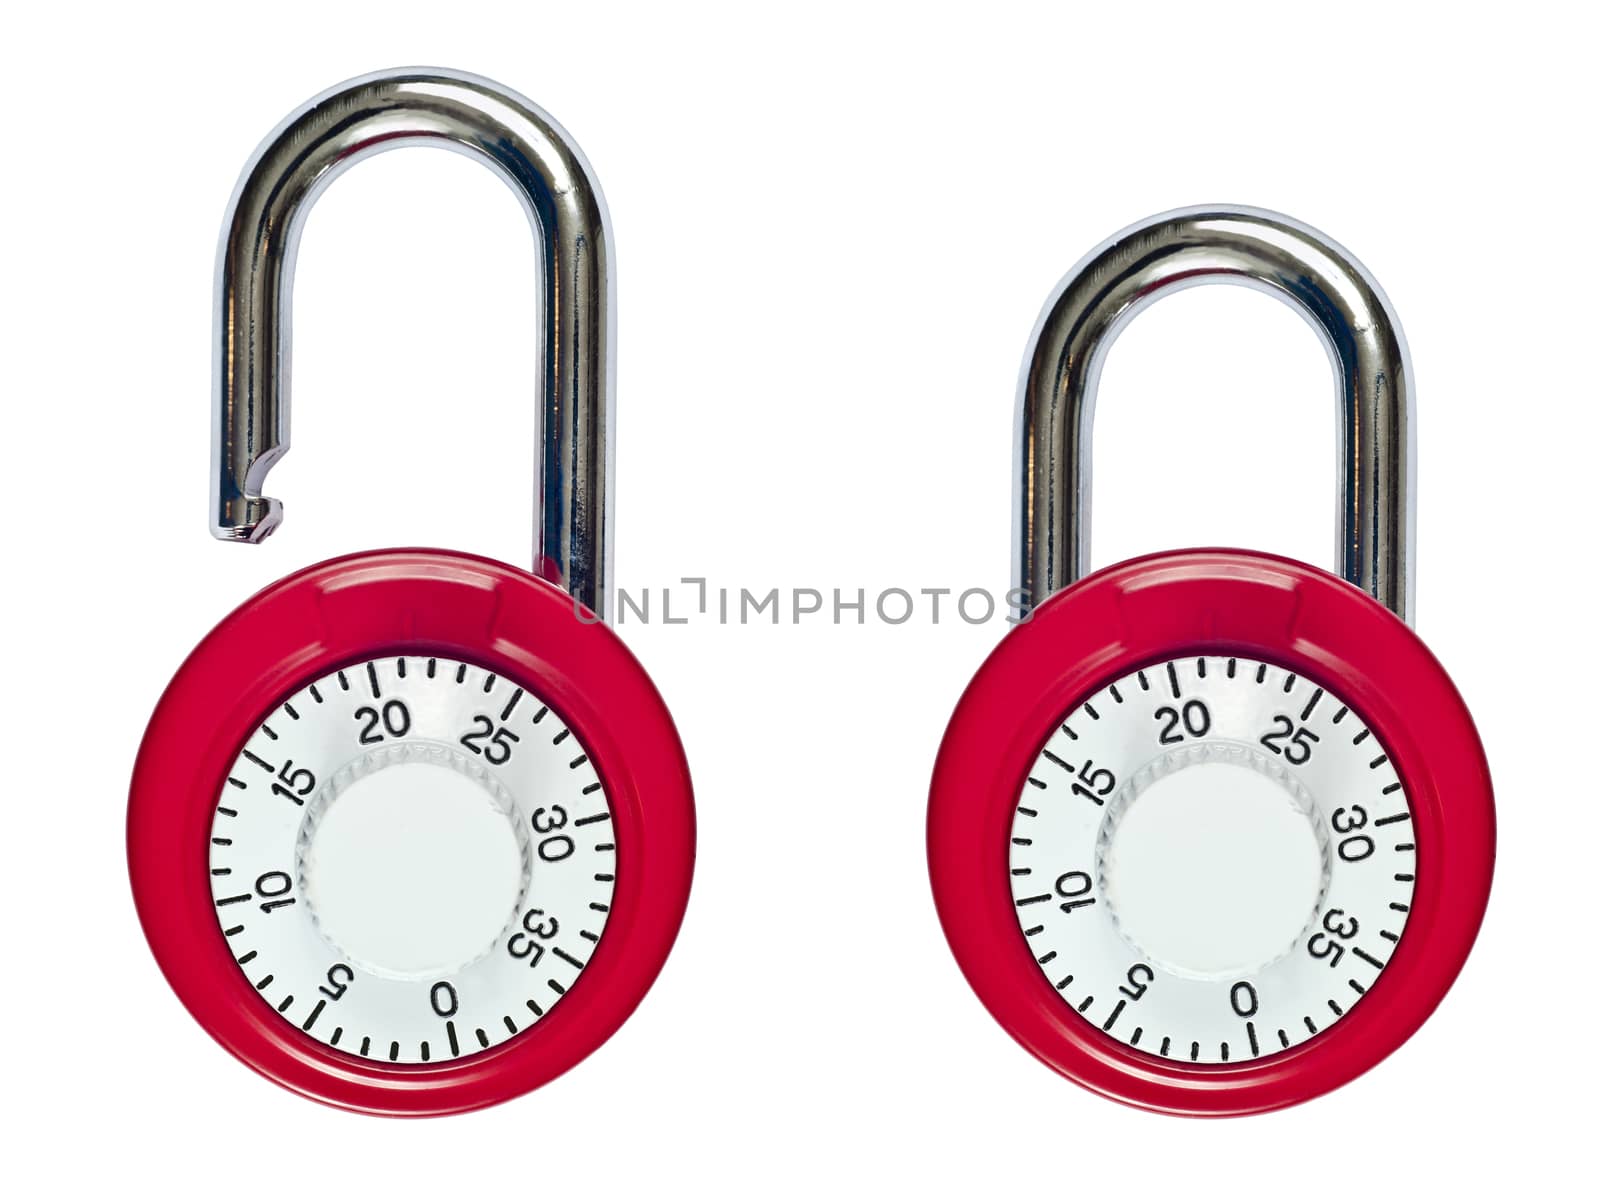 Close up of a pair of red and white combination locks..one unlocked and one locked. Isolated on white